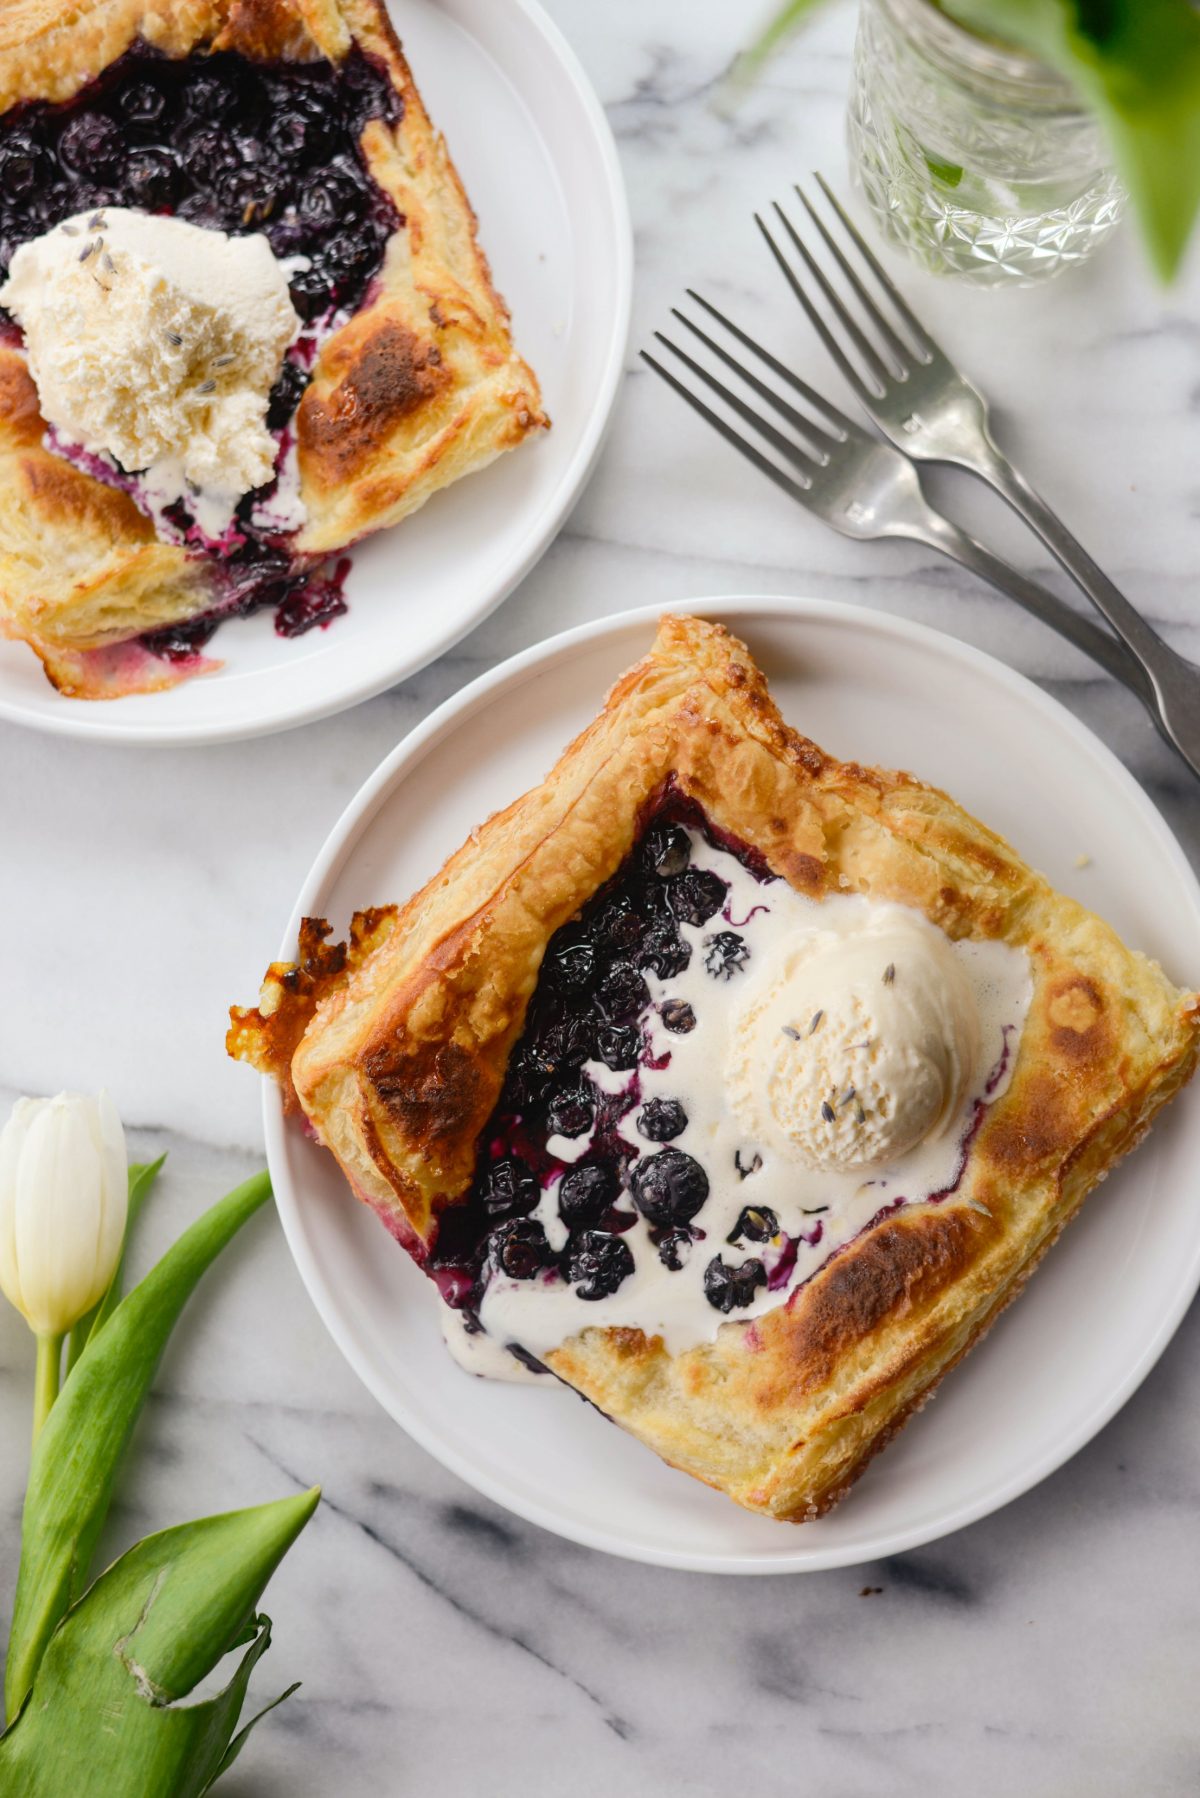 Blueberry Lavender Pastry Pies with ice cream